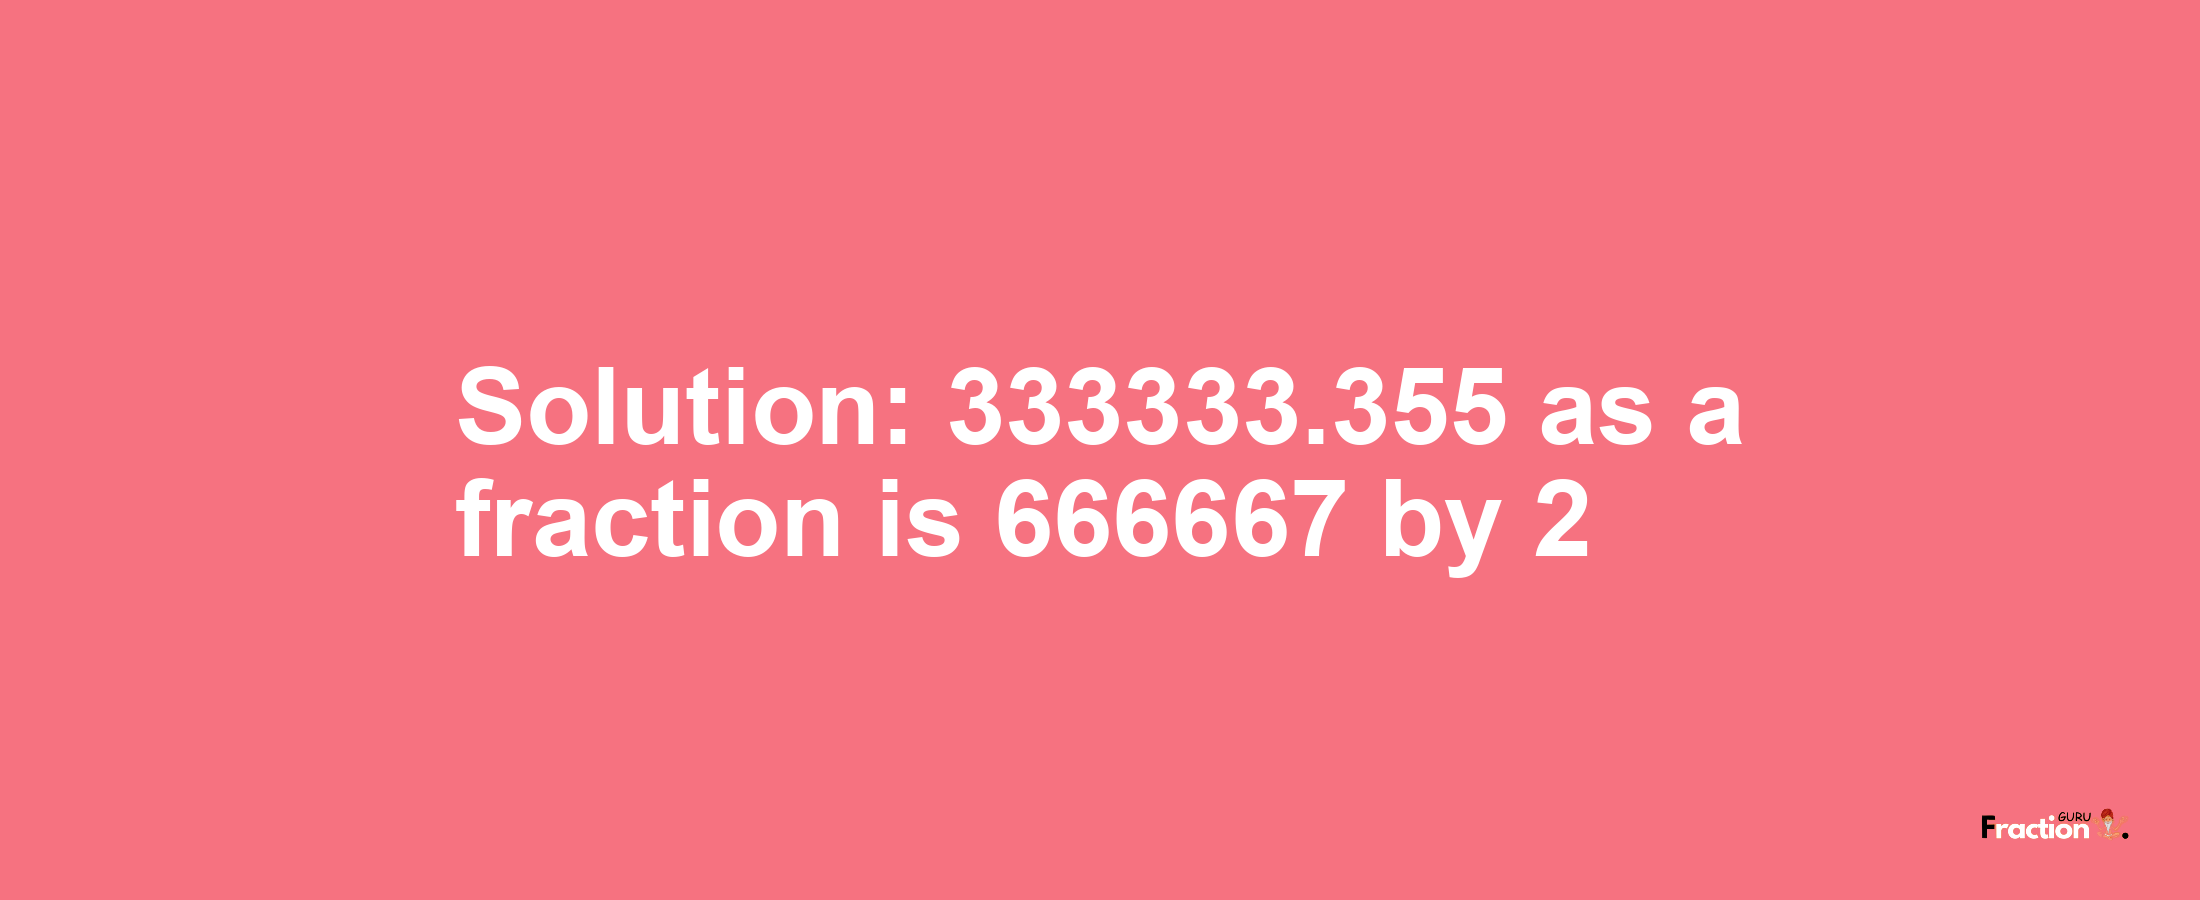 Solution:333333.355 as a fraction is 666667/2